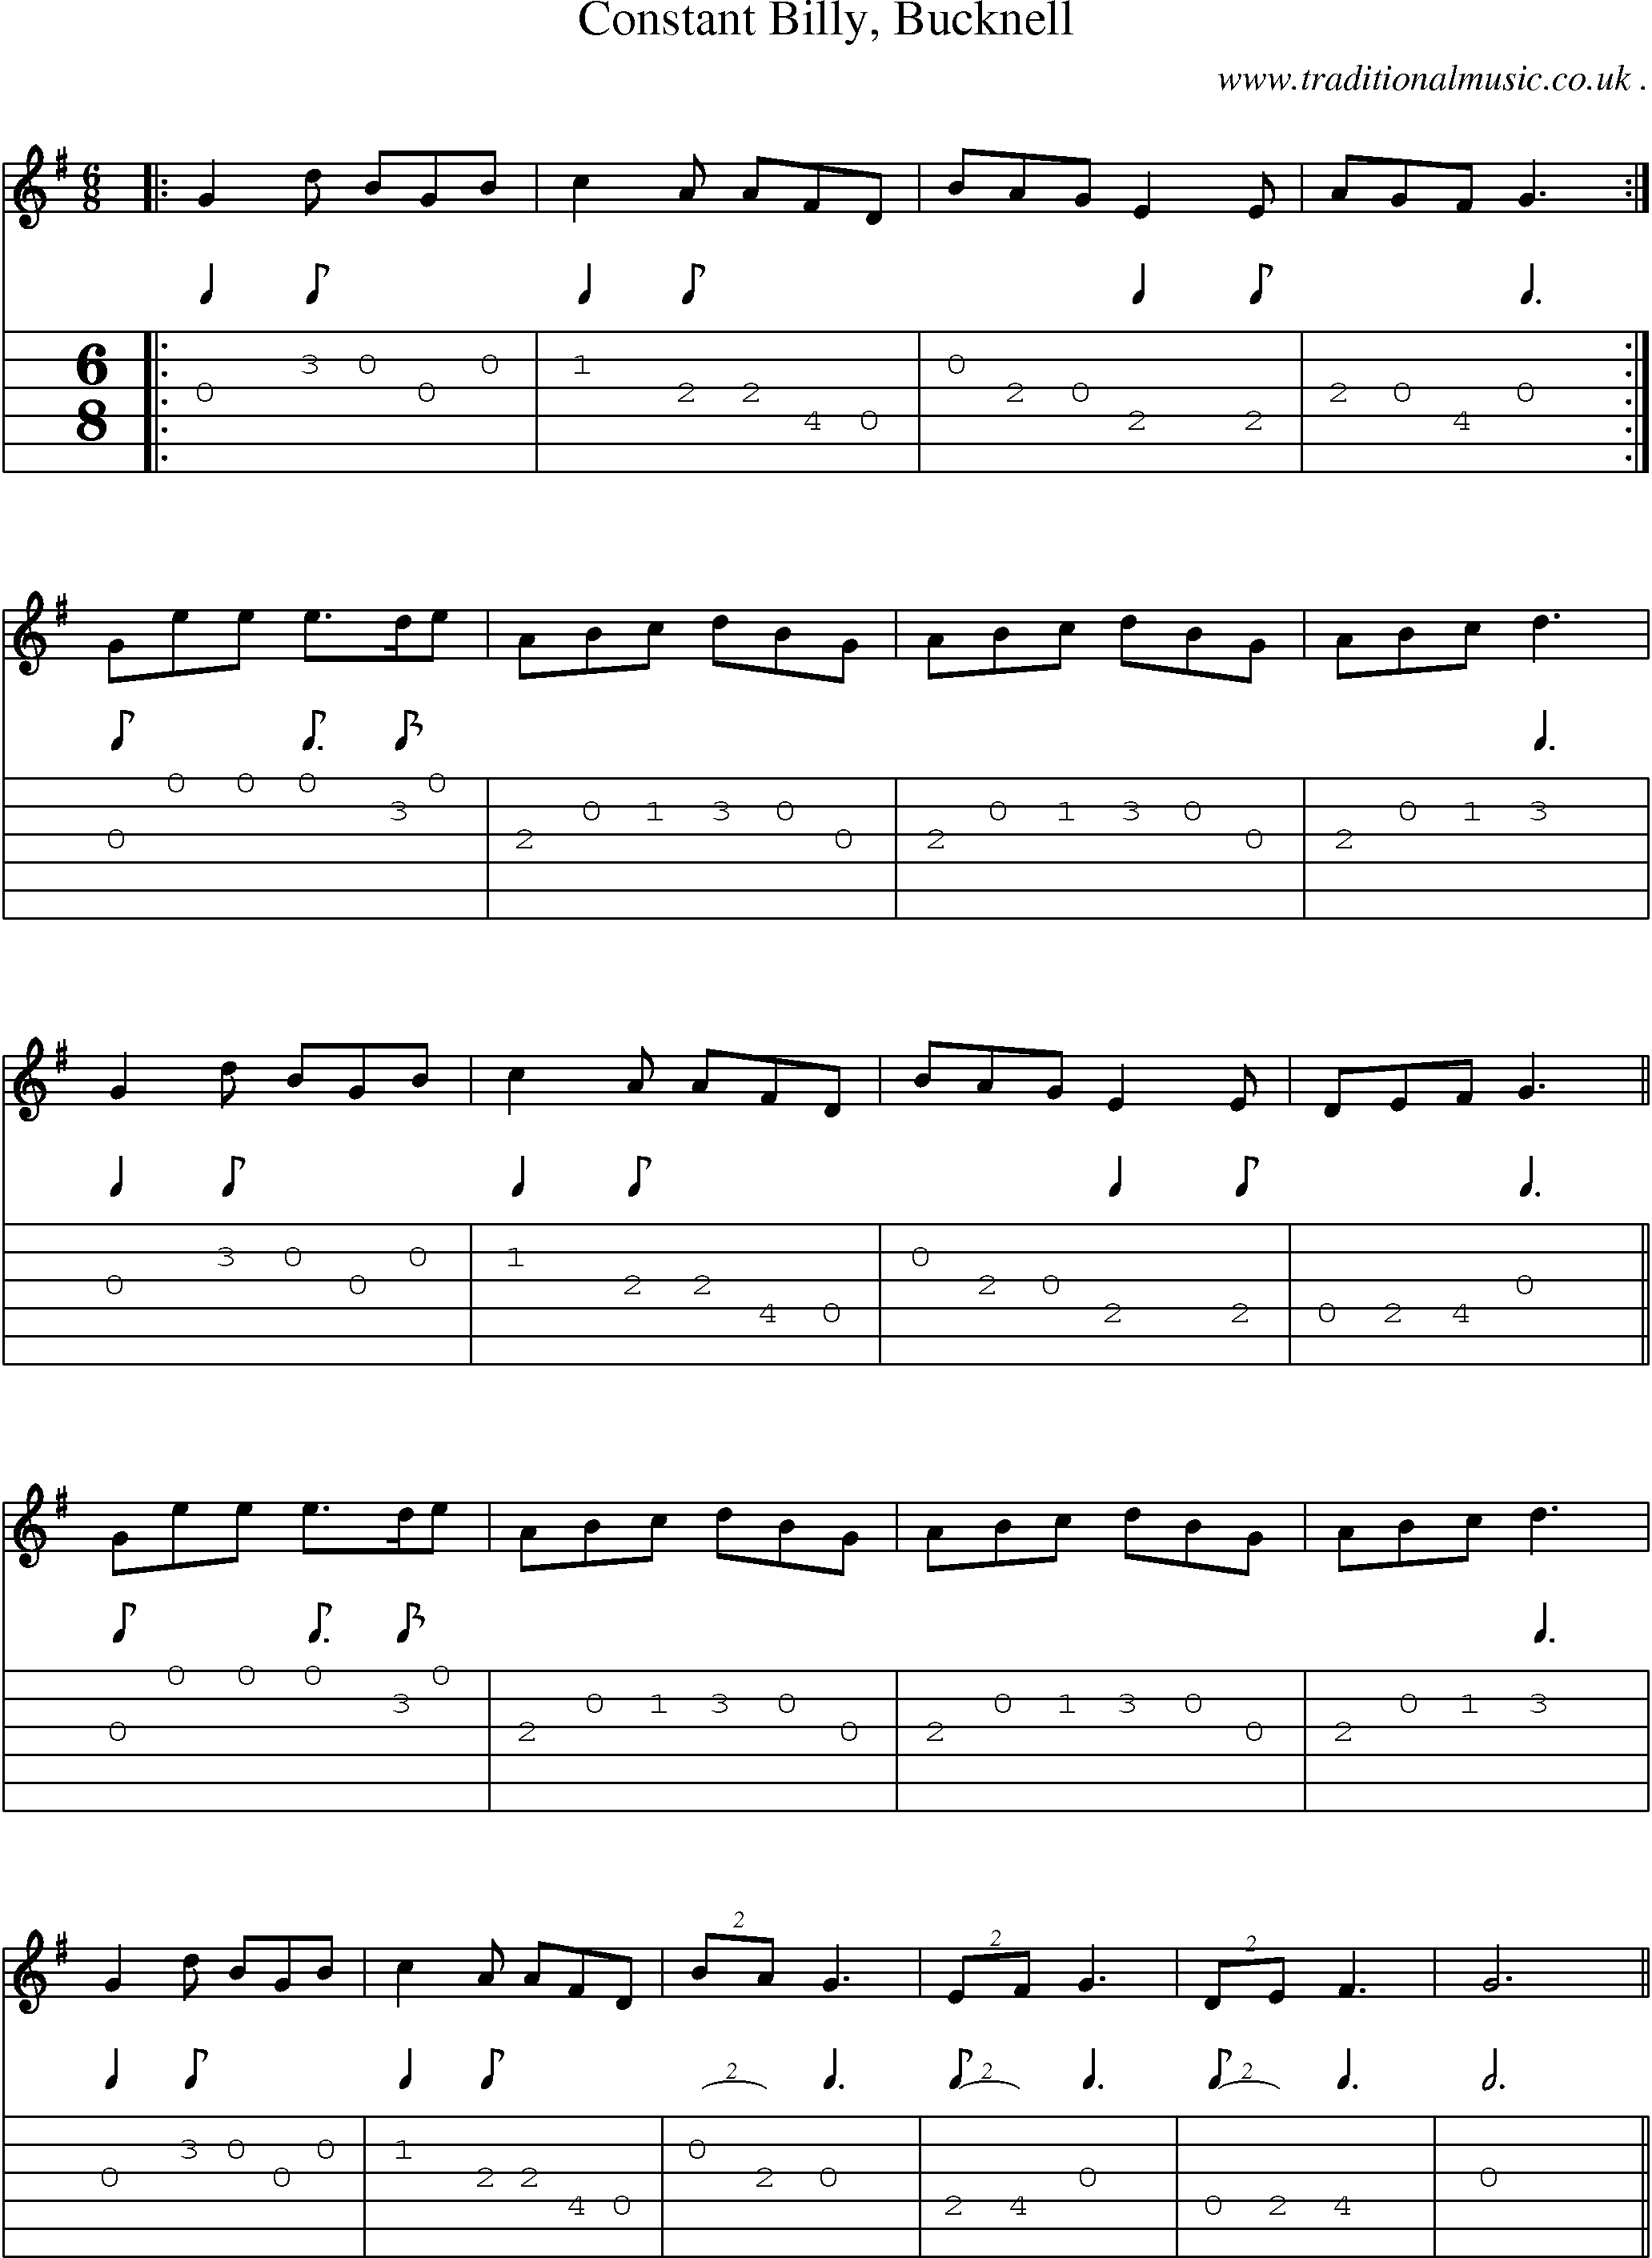 Sheet-Music and Guitar Tabs for Constant Billy Bucknell